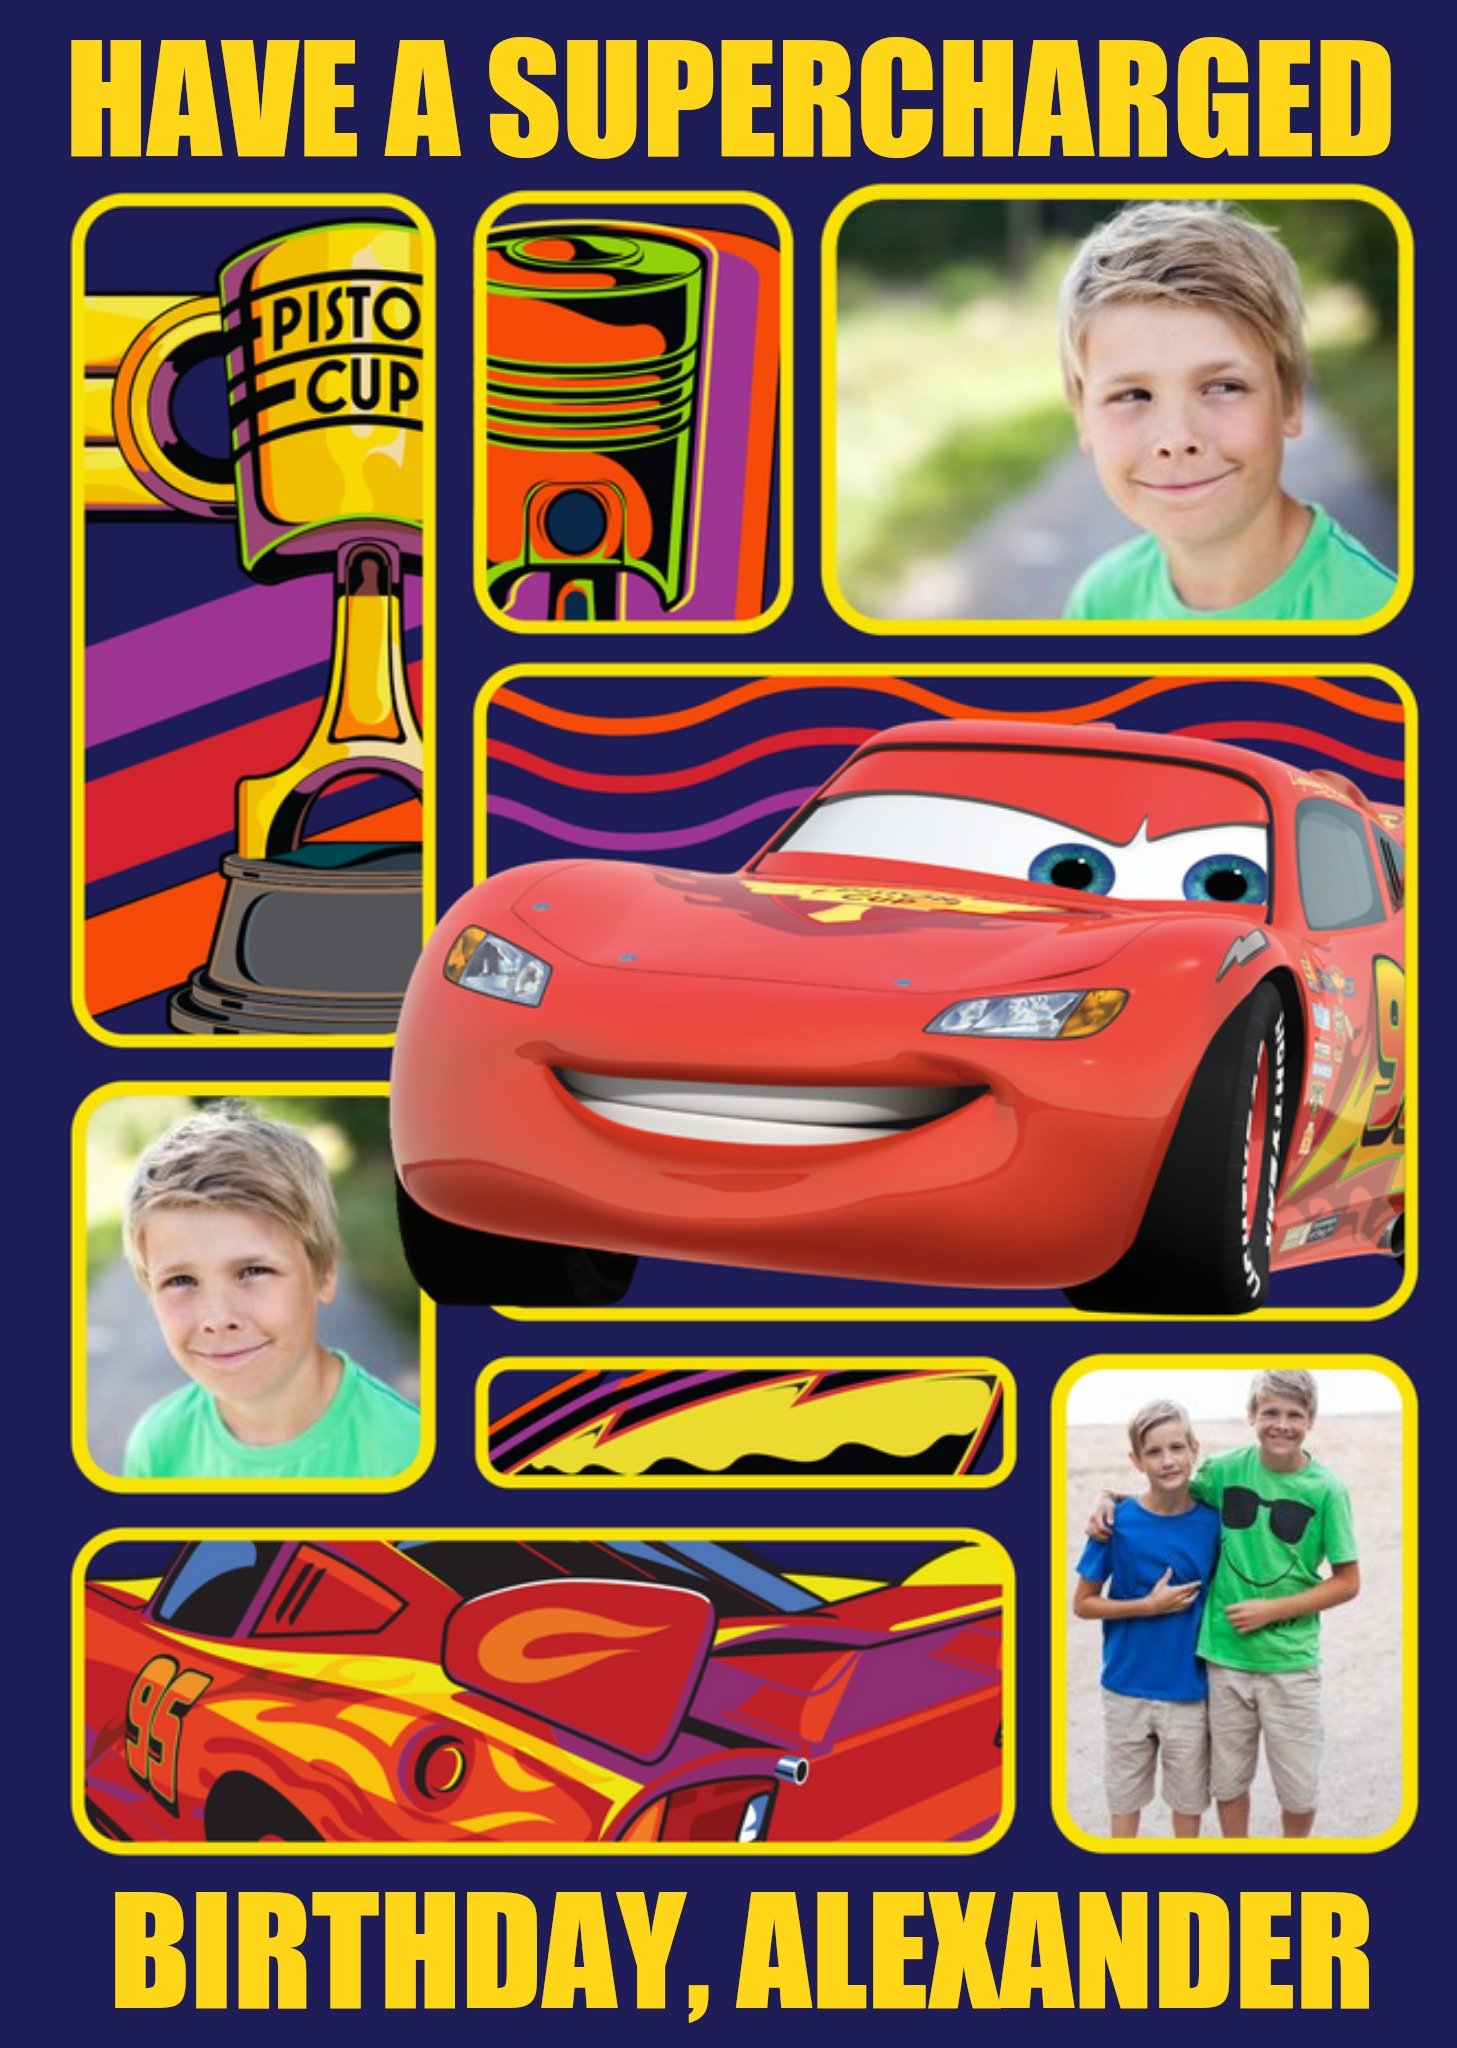 Disney Cars Lightning Mcqueen Supercharged Photo Upload Happy Birthday Card, Large